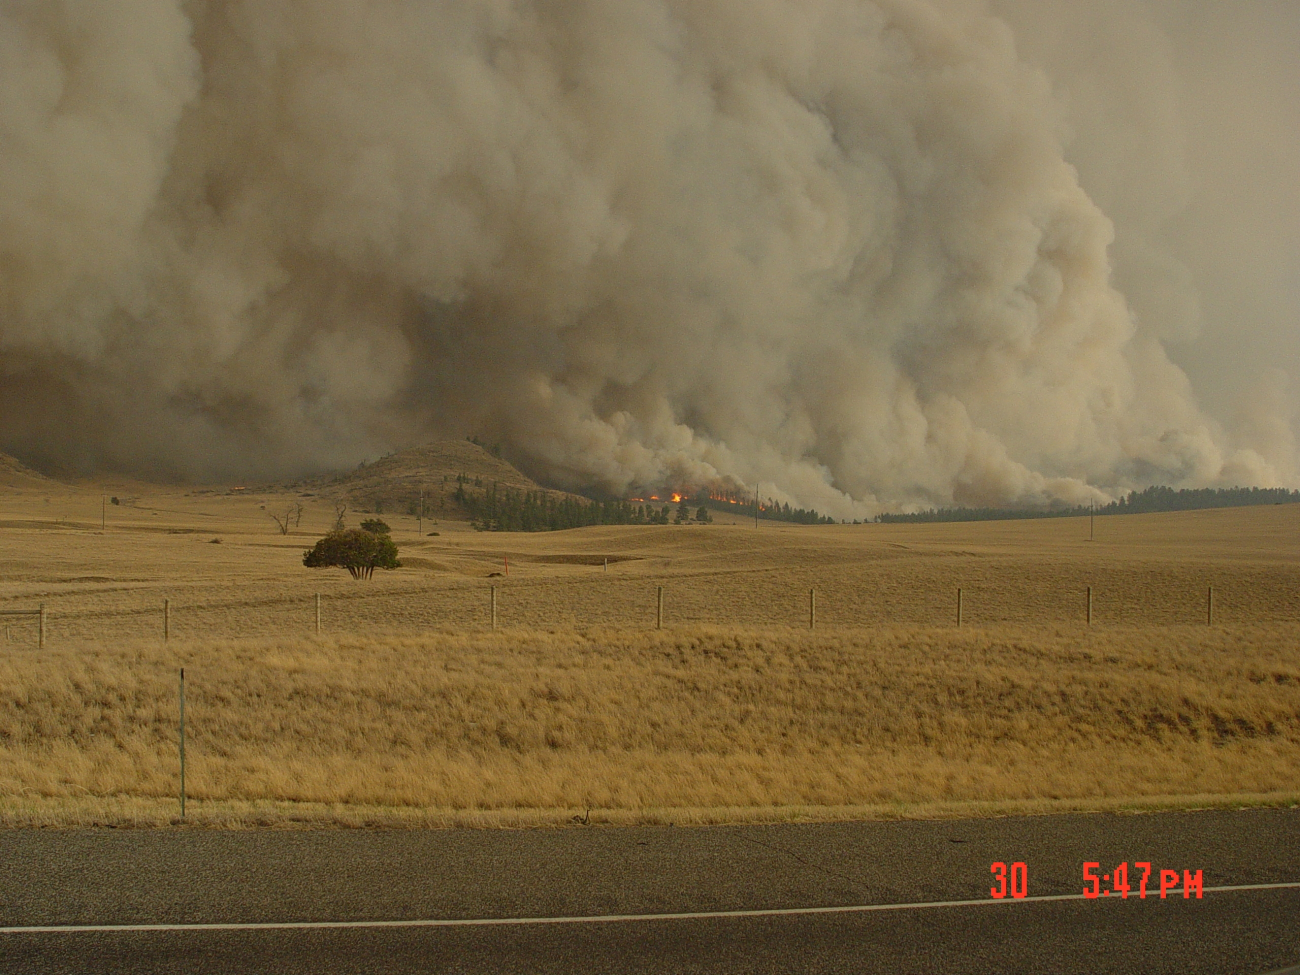 The Derby Fire continues unabated growth on its way to consuming 200,000 acres